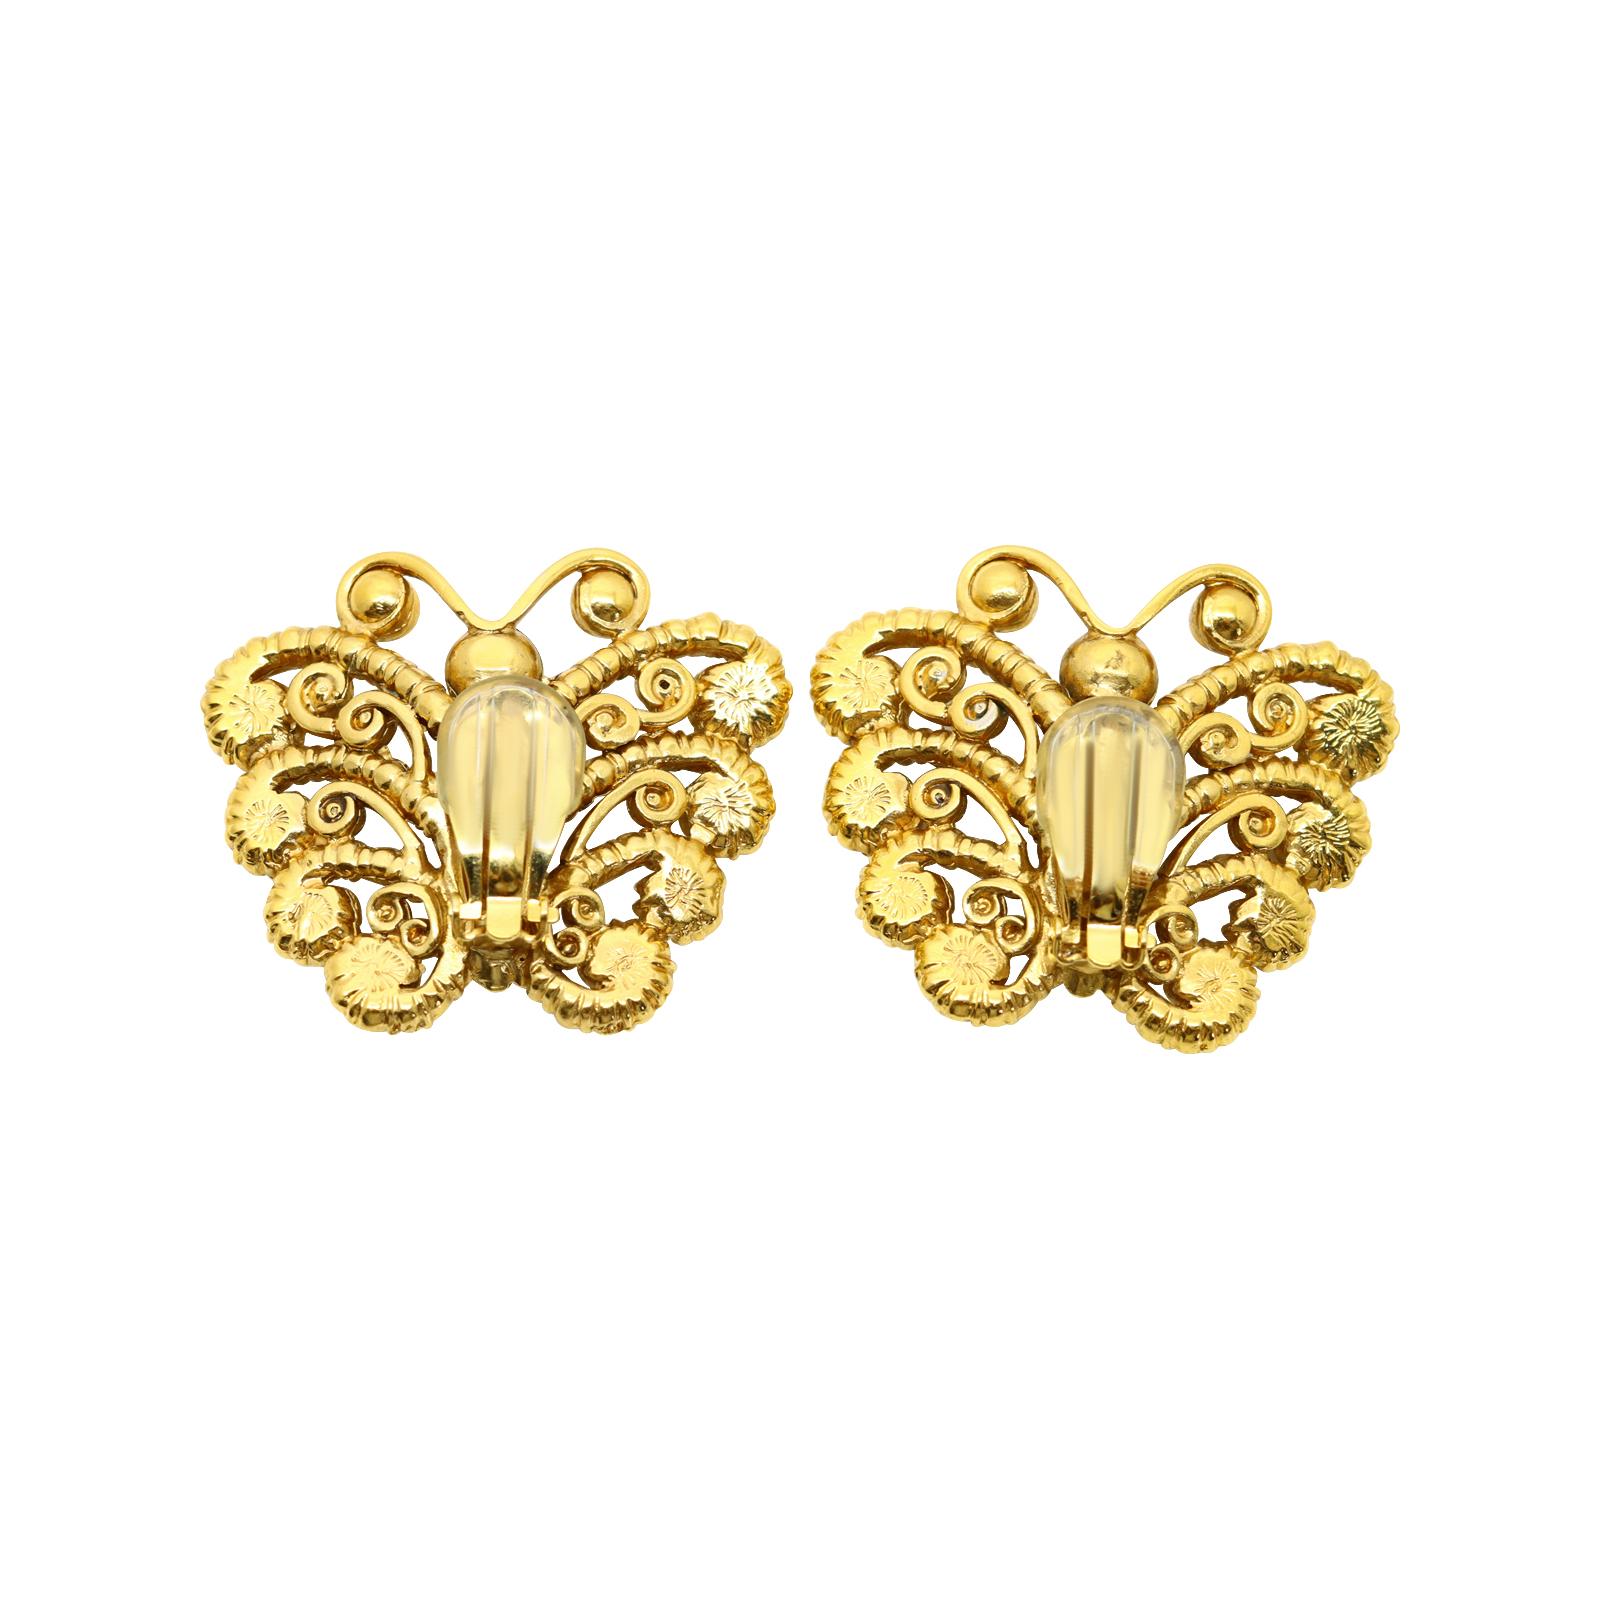 Vintage Christian Dior Boutique Gold Diamante Butterfly Earrings Circa 1980s For Sale 1